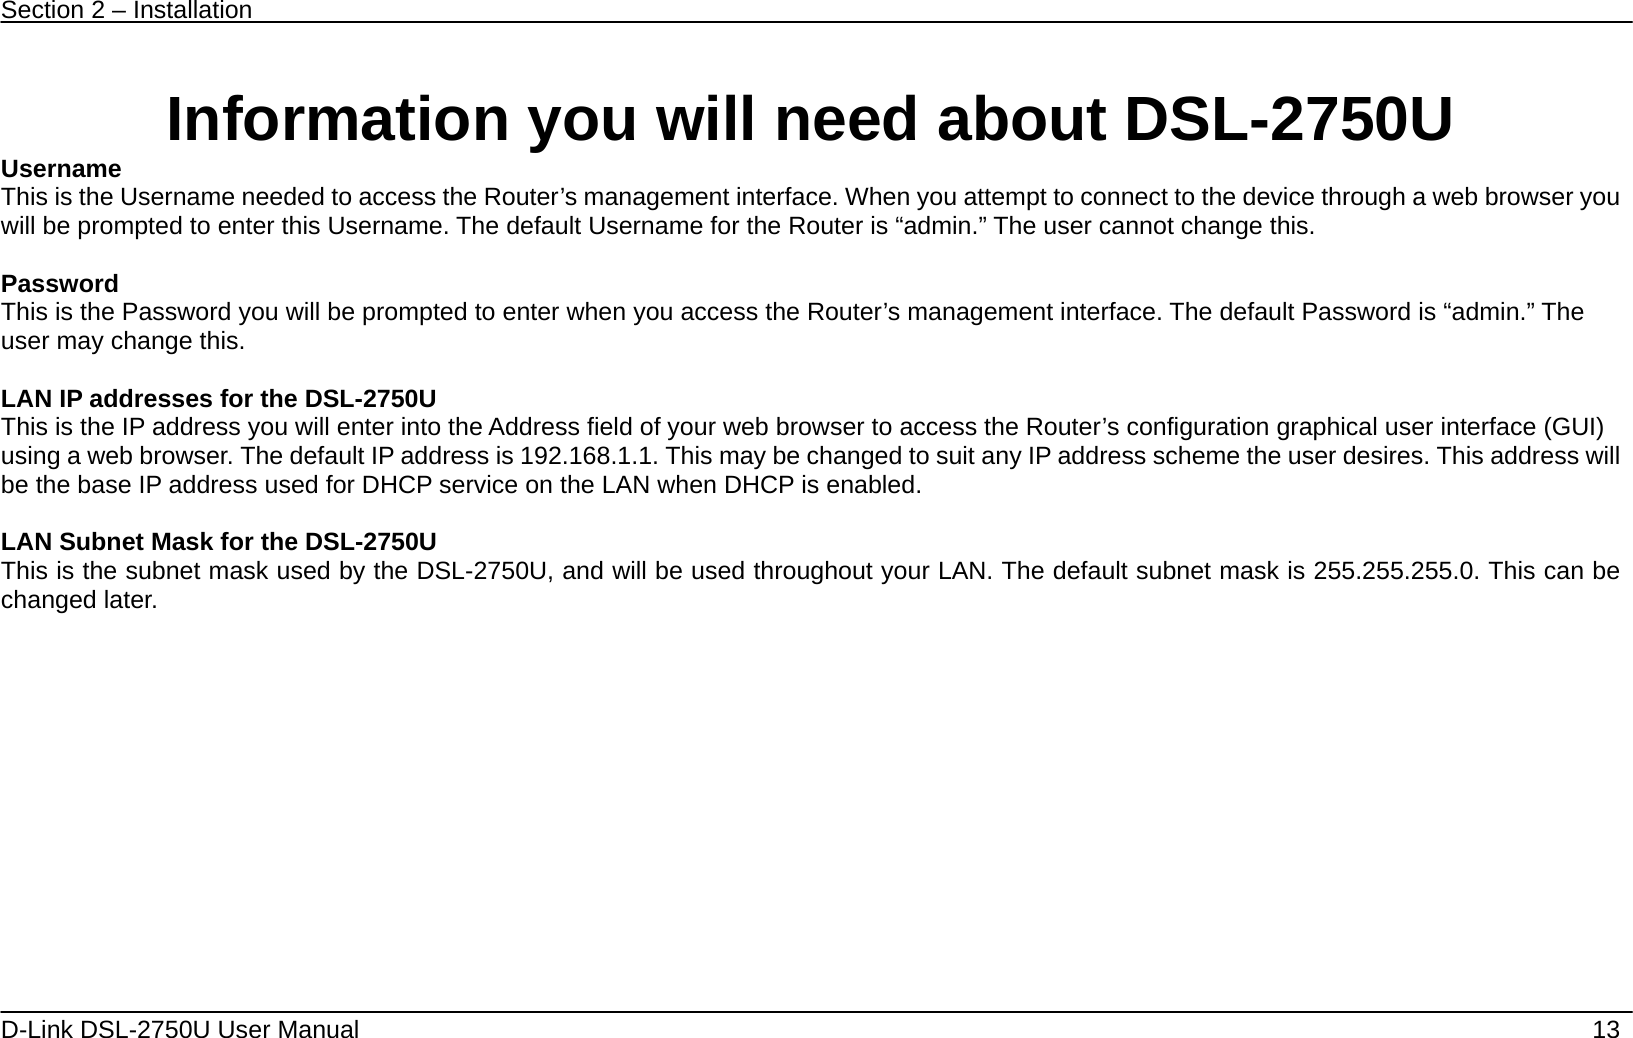 Section 2 – Installation   D-Link DSL-2750U User Manual    13  Information you will need about DSL-2750U Username  This is the Username needed to access the Router’s management interface. When you attempt to connect to the device through a web browser you will be prompted to enter this Username. The default Username for the Router is “admin.” The user cannot change this.  Password This is the Password you will be prompted to enter when you access the Router’s management interface. The default Password is “admin.” The user may change this.  LAN IP addresses for the DSL-2750U This is the IP address you will enter into the Address field of your web browser to access the Router’s configuration graphical user interface (GUI) using a web browser. The default IP address is 192.168.1.1. This may be changed to suit any IP address scheme the user desires. This address will be the base IP address used for DHCP service on the LAN when DHCP is enabled.  LAN Subnet Mask for the DSL-2750U This is the subnet mask used by the DSL-2750U, and will be used throughout your LAN. The default subnet mask is 255.255.255.0. This can be changed later.   